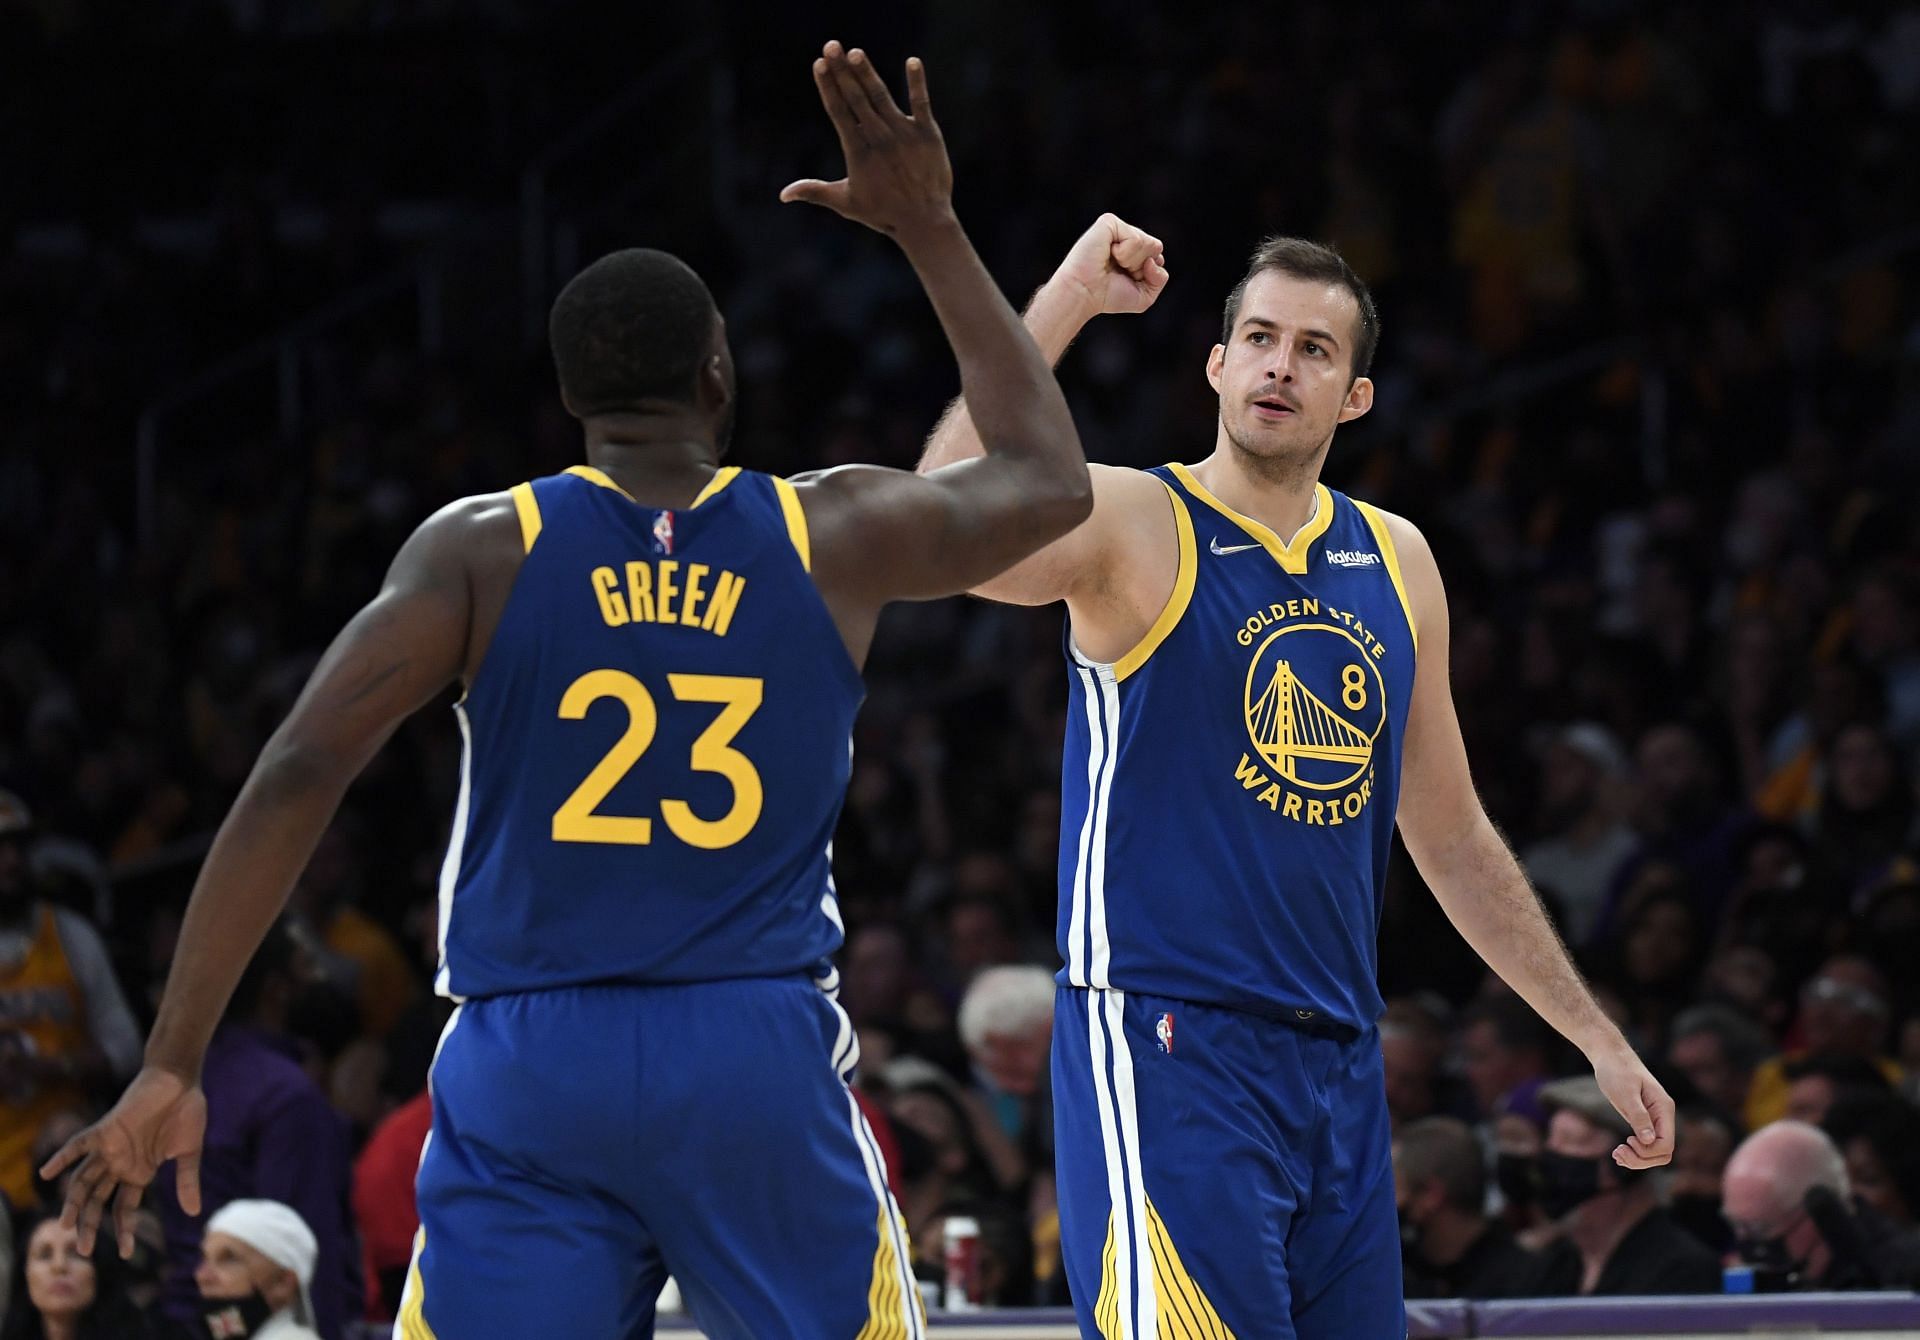 Nemanja Bjelica #8 of the Golden State Warriors is congratulated by Draymond Green #23 after scoring against Los Angeles Lakers during the second half at Staples Center on October 19, 2021 in Los Angeles, California.